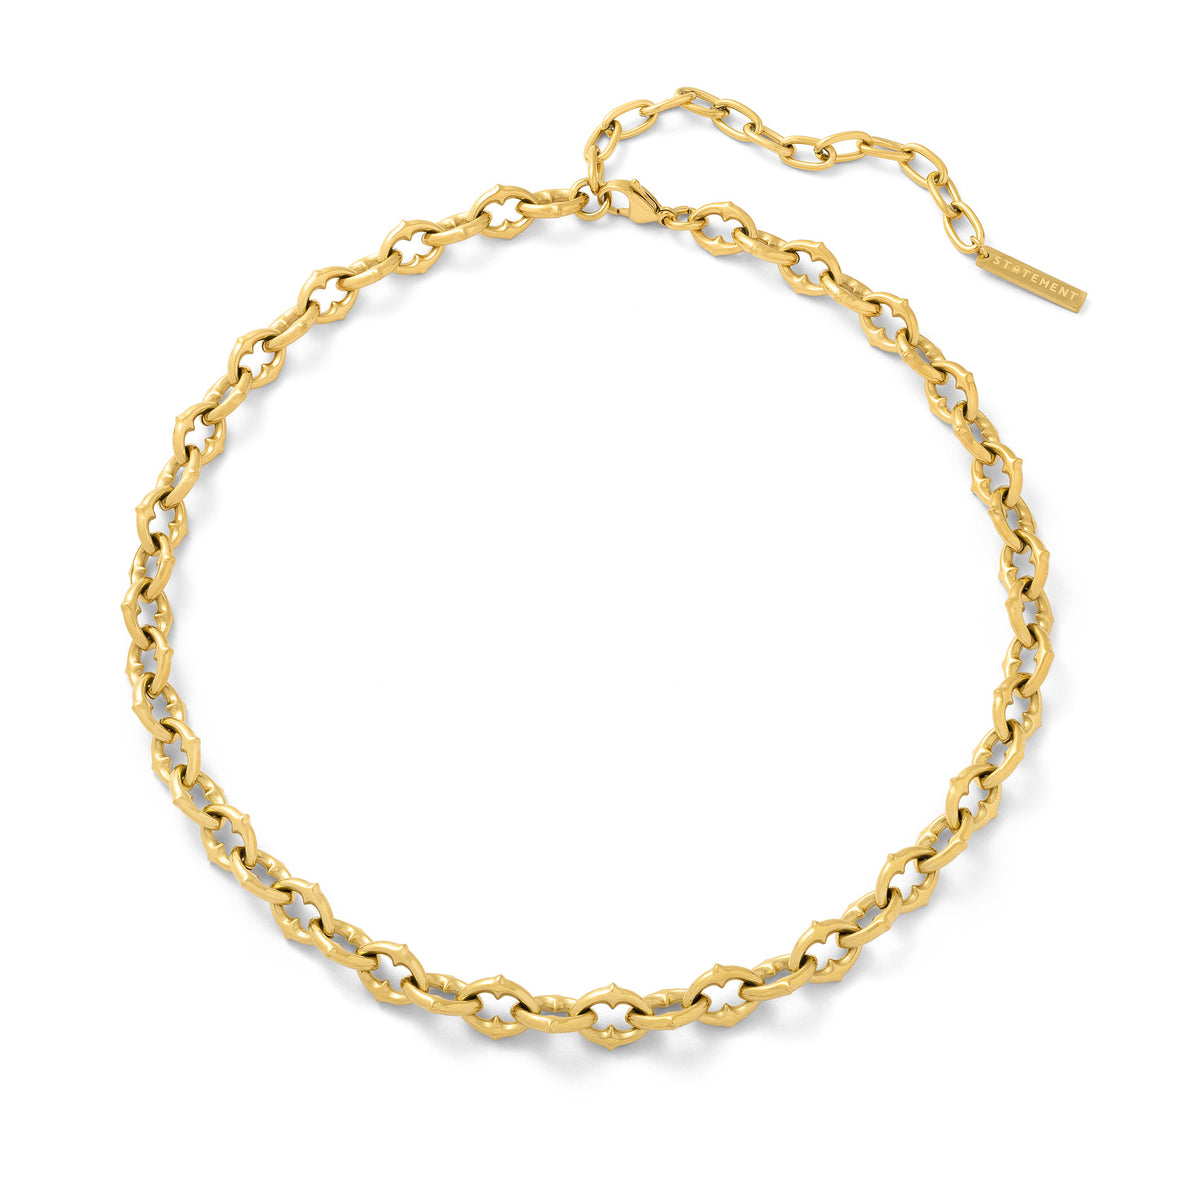 Spiked Chain Link necklace in gold